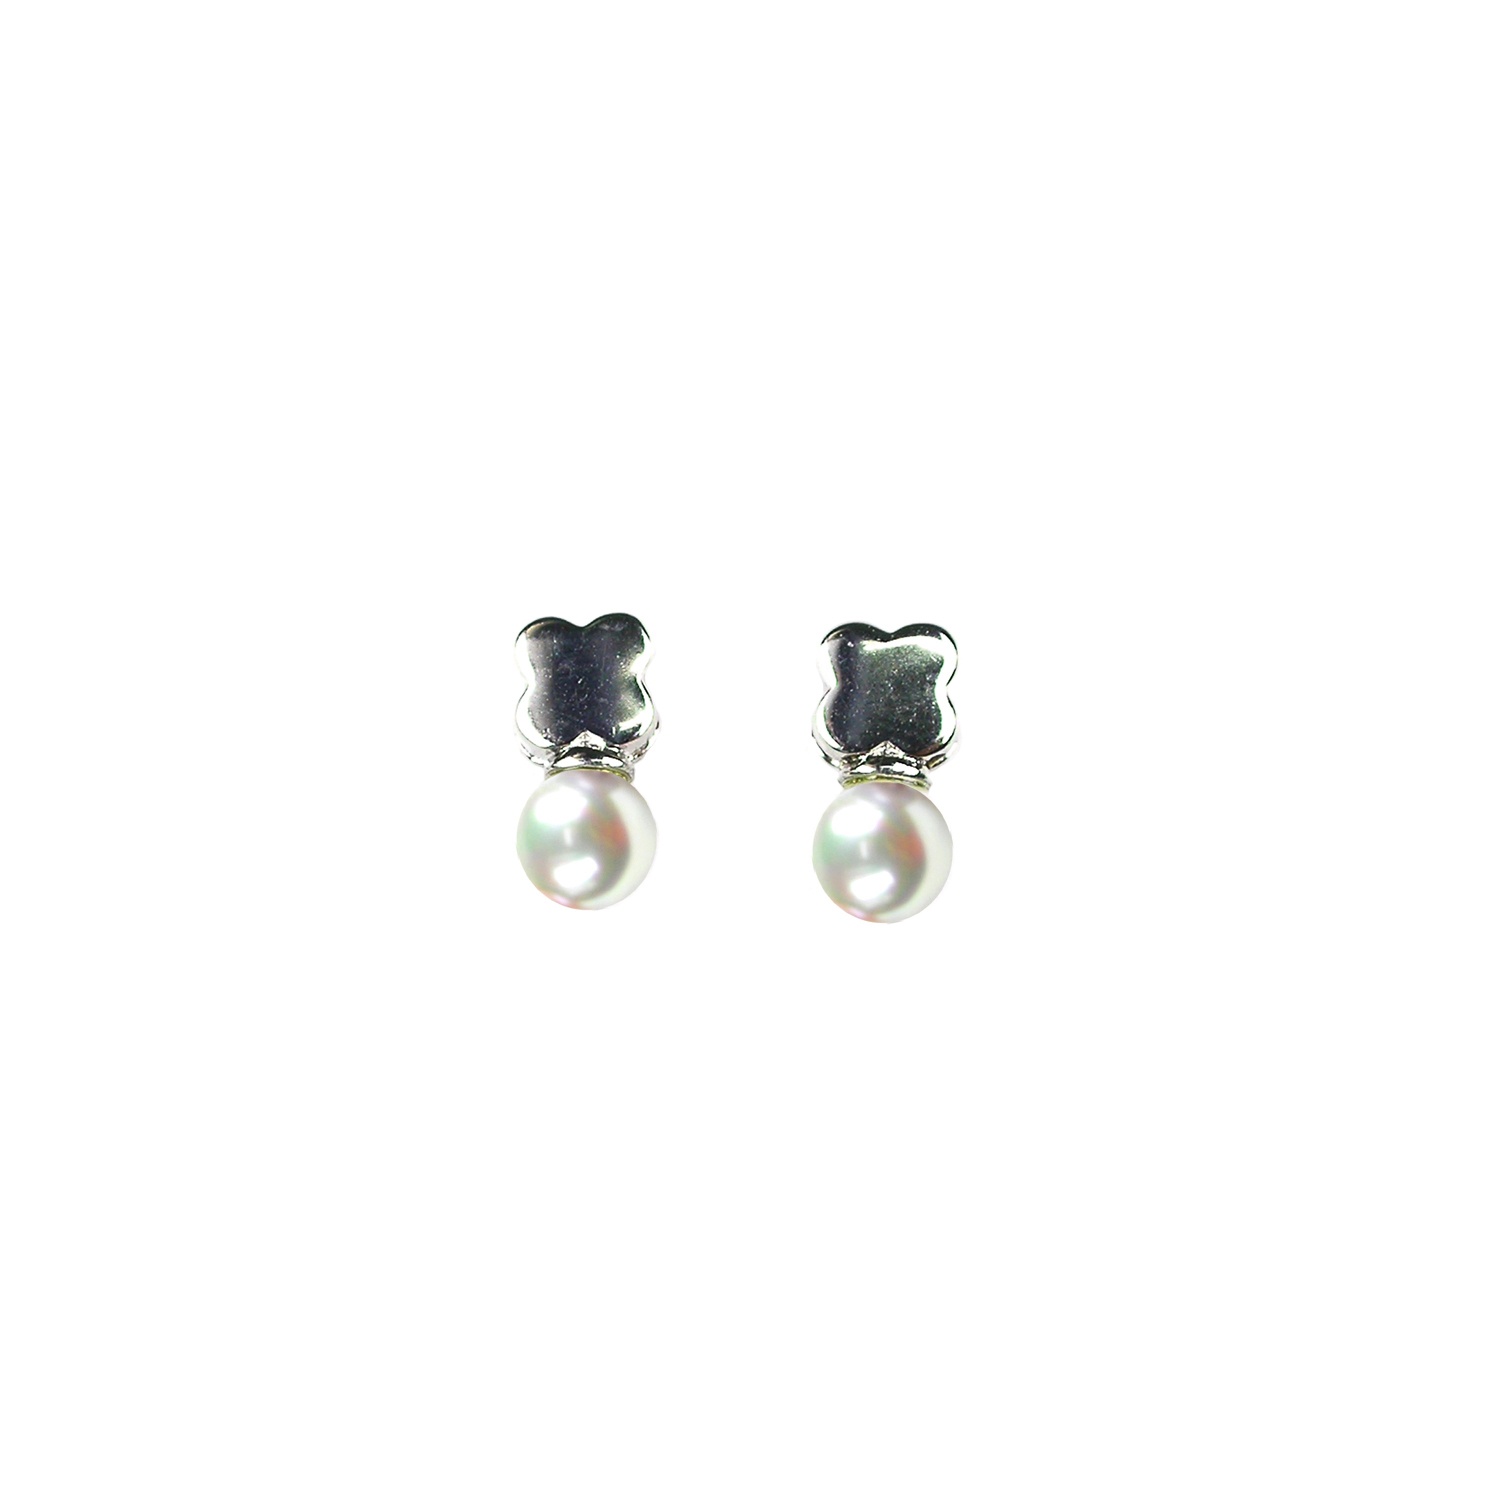 Sterling Silver Earrings with 5 mm. Pearls